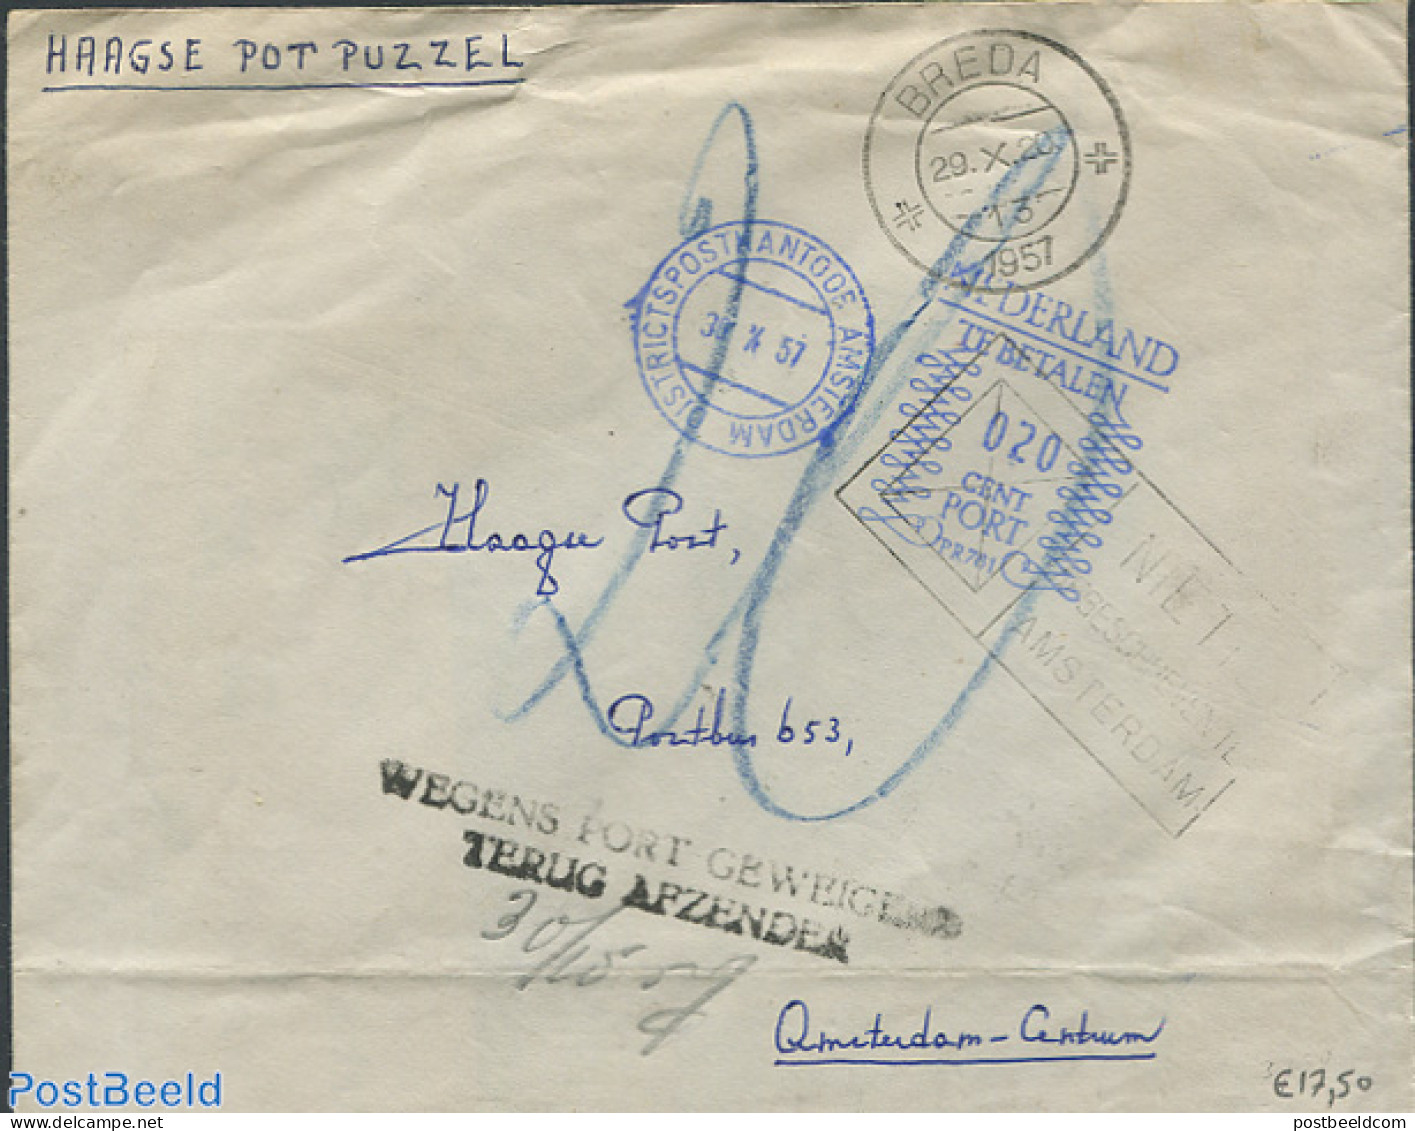 Netherlands 1957 Envelope From The Hague To Amsterdam,via Breda. Postage Due 20 Cent., Postal History - Covers & Documents